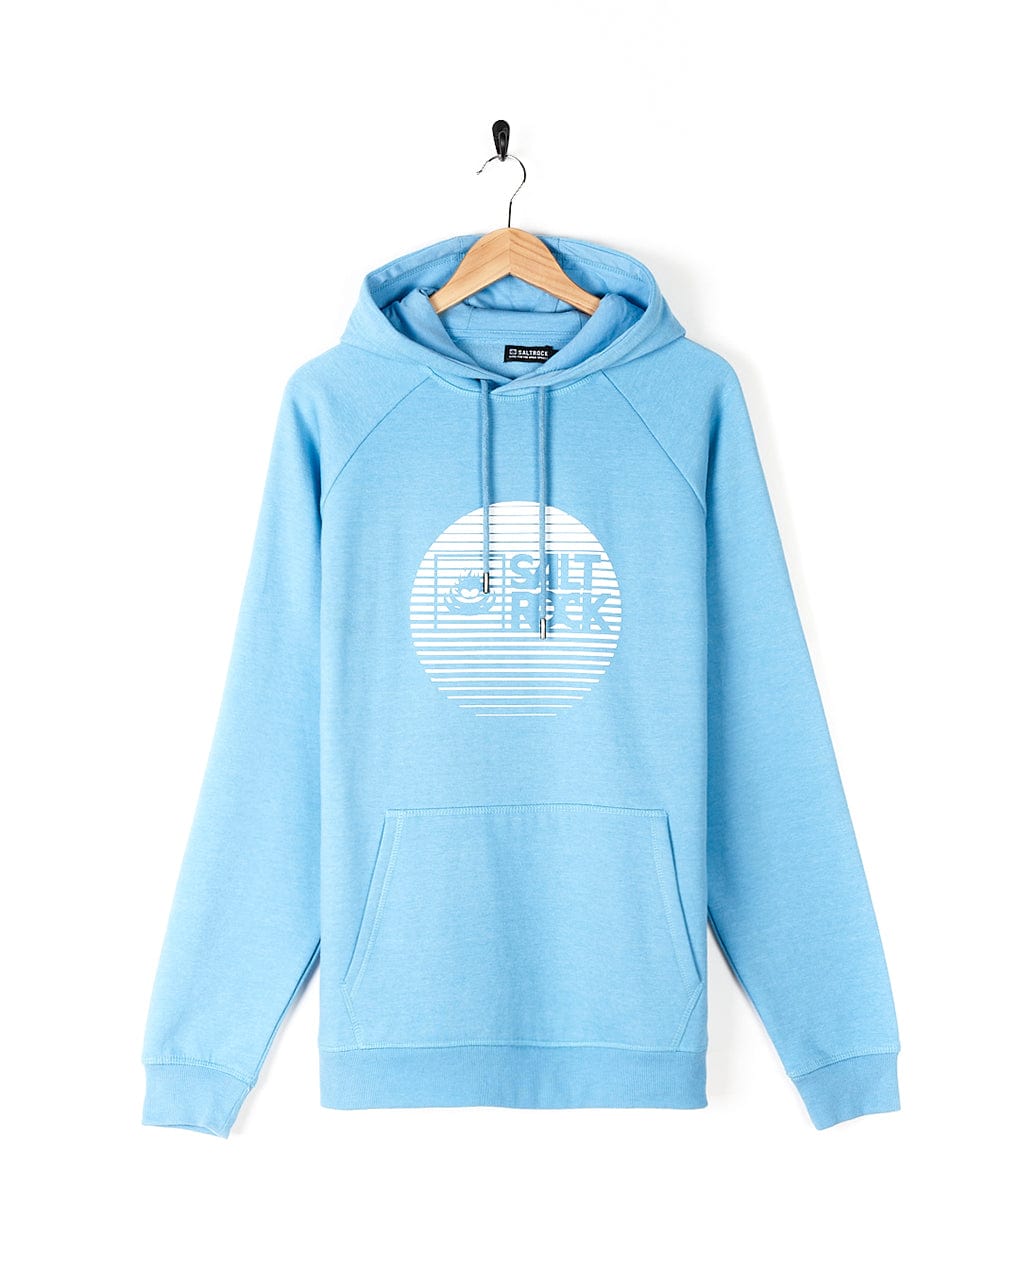 A Corp Logo Fade - Mens Hoodie - Light Blue with the Saltrock logo on it.